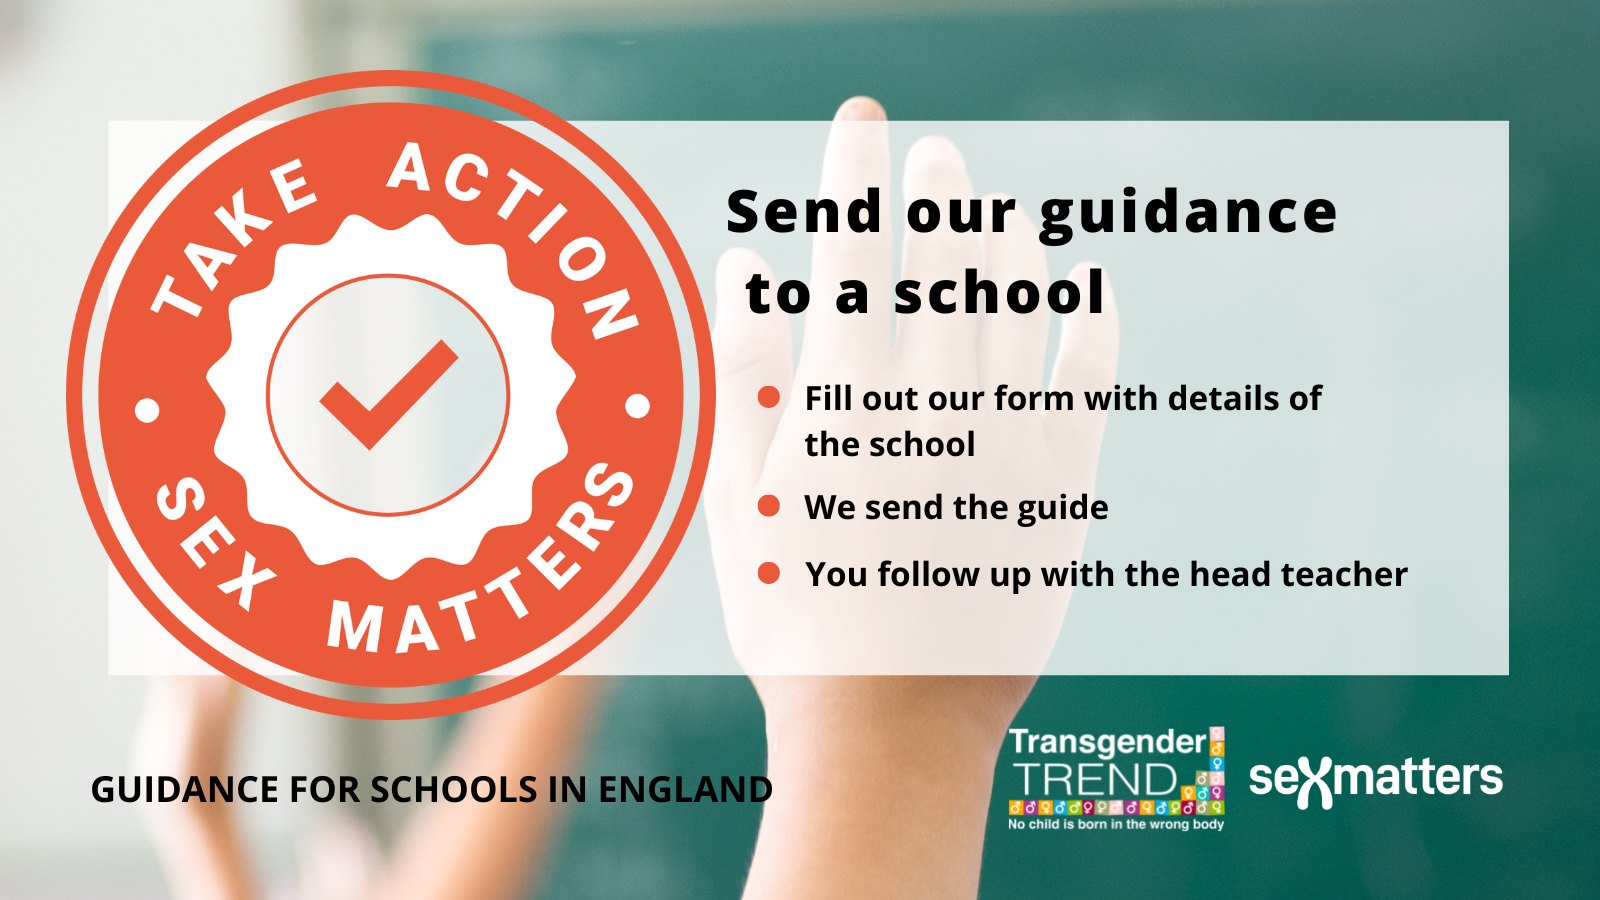 Send our guidance to a school Fill out our form with the school's details We send the guide You follow up with the head teacher